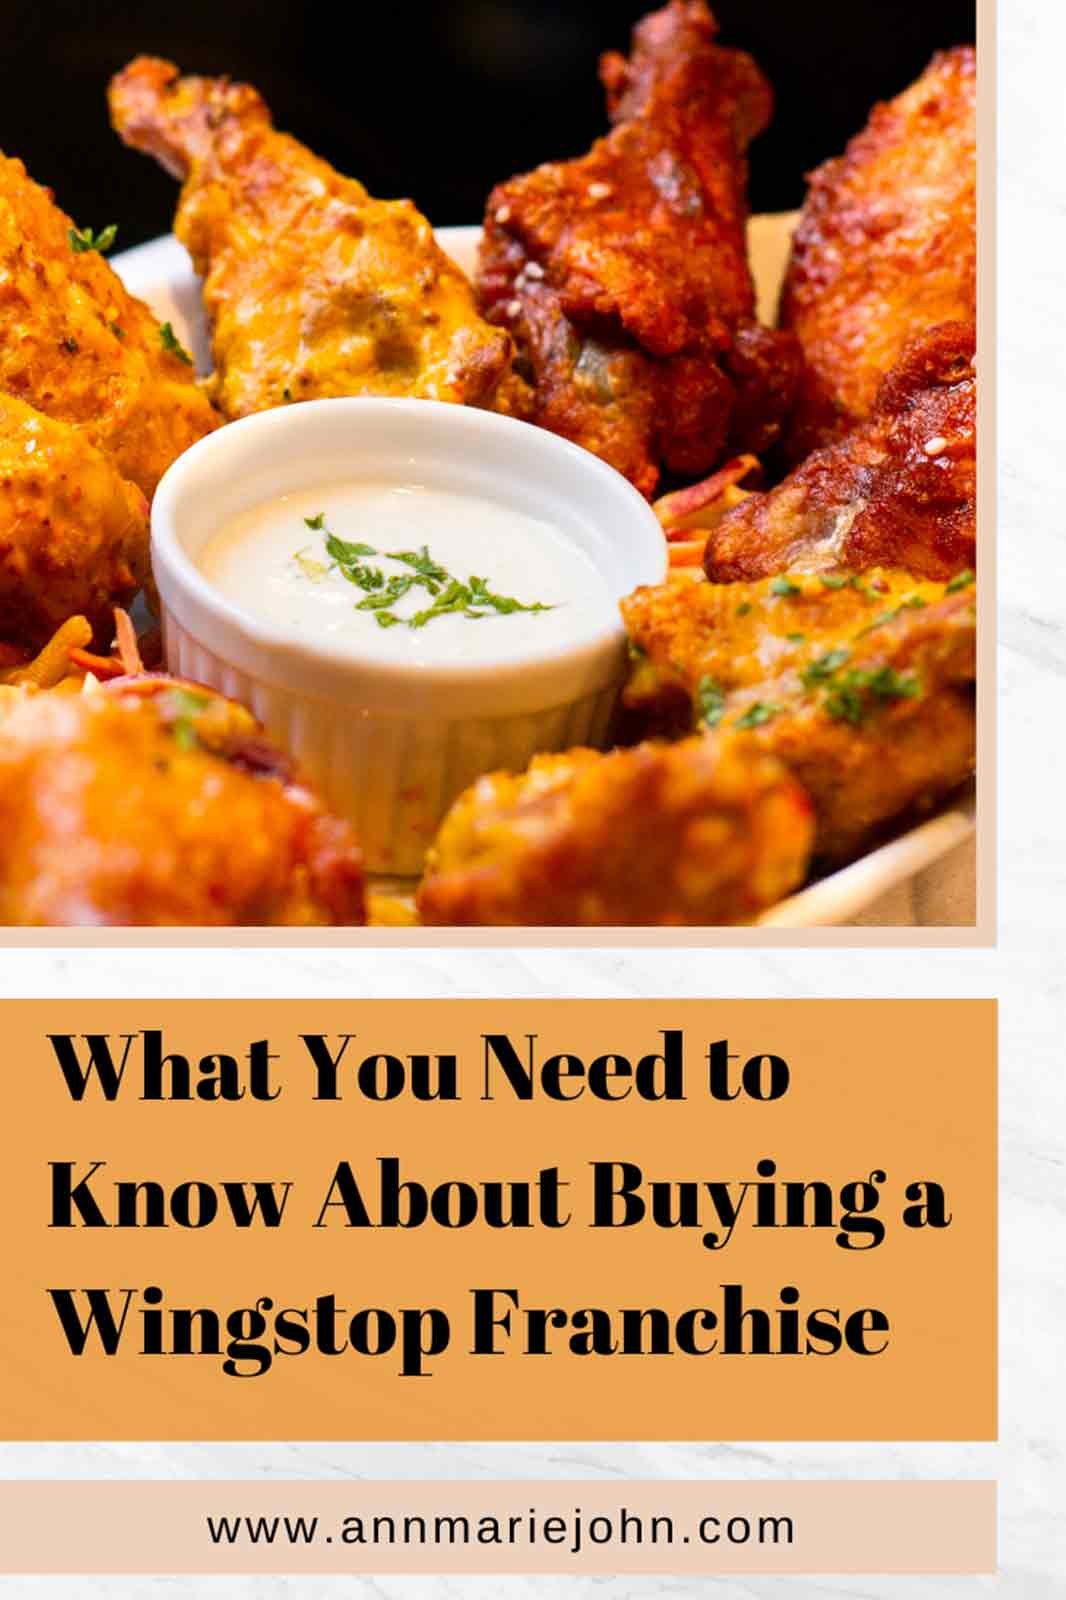 What You Need to Know About Buying a Wingstop Franchise